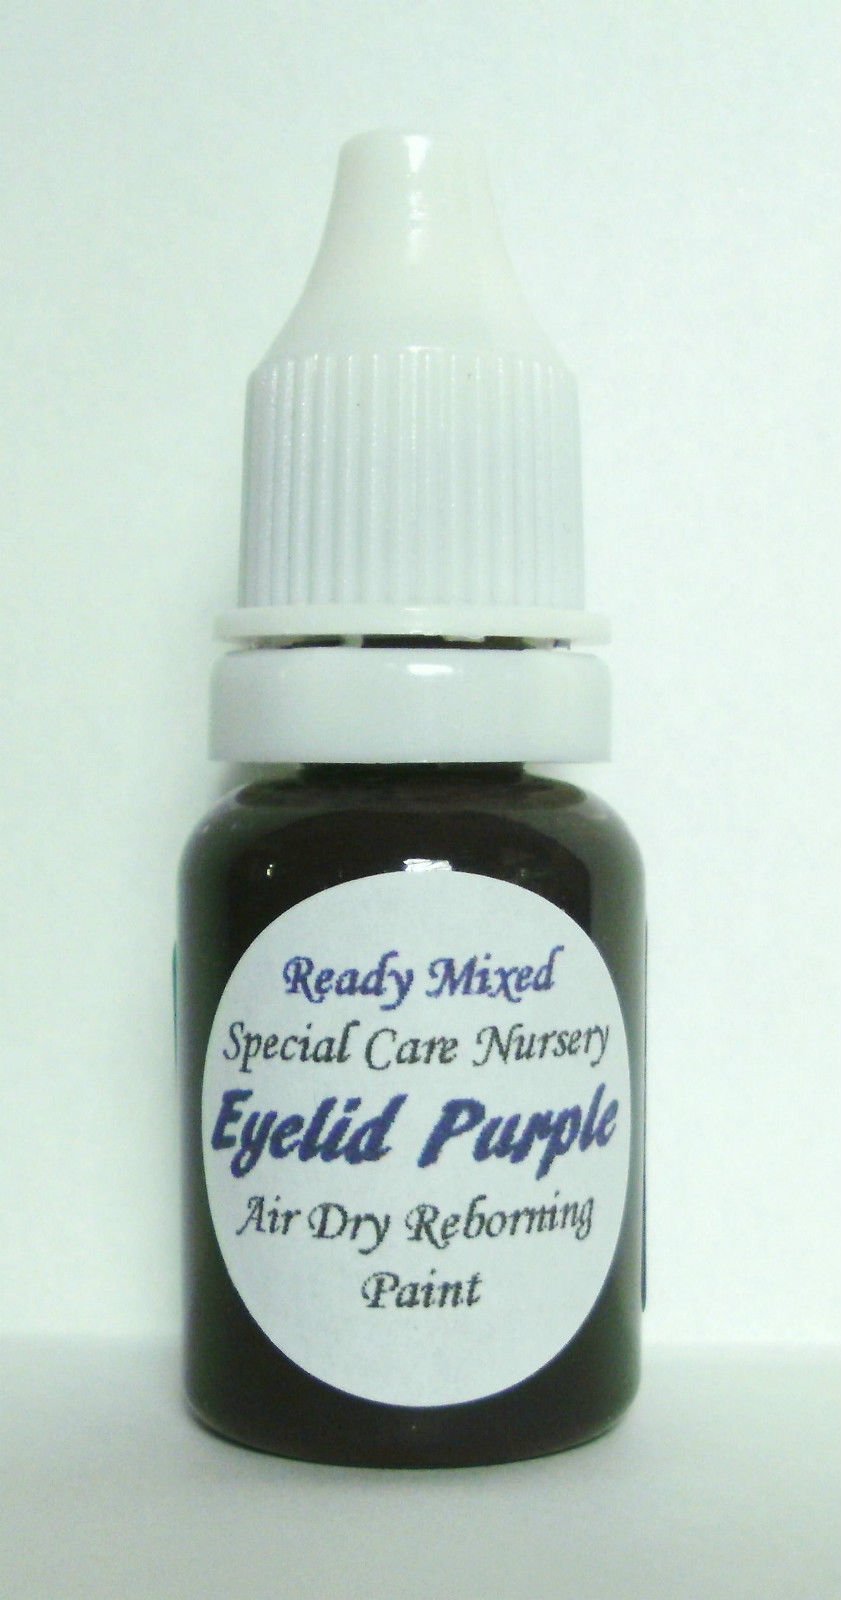 Special Care Nursery Air dry paints - * The Detailing paints* - 10ml Eyelid